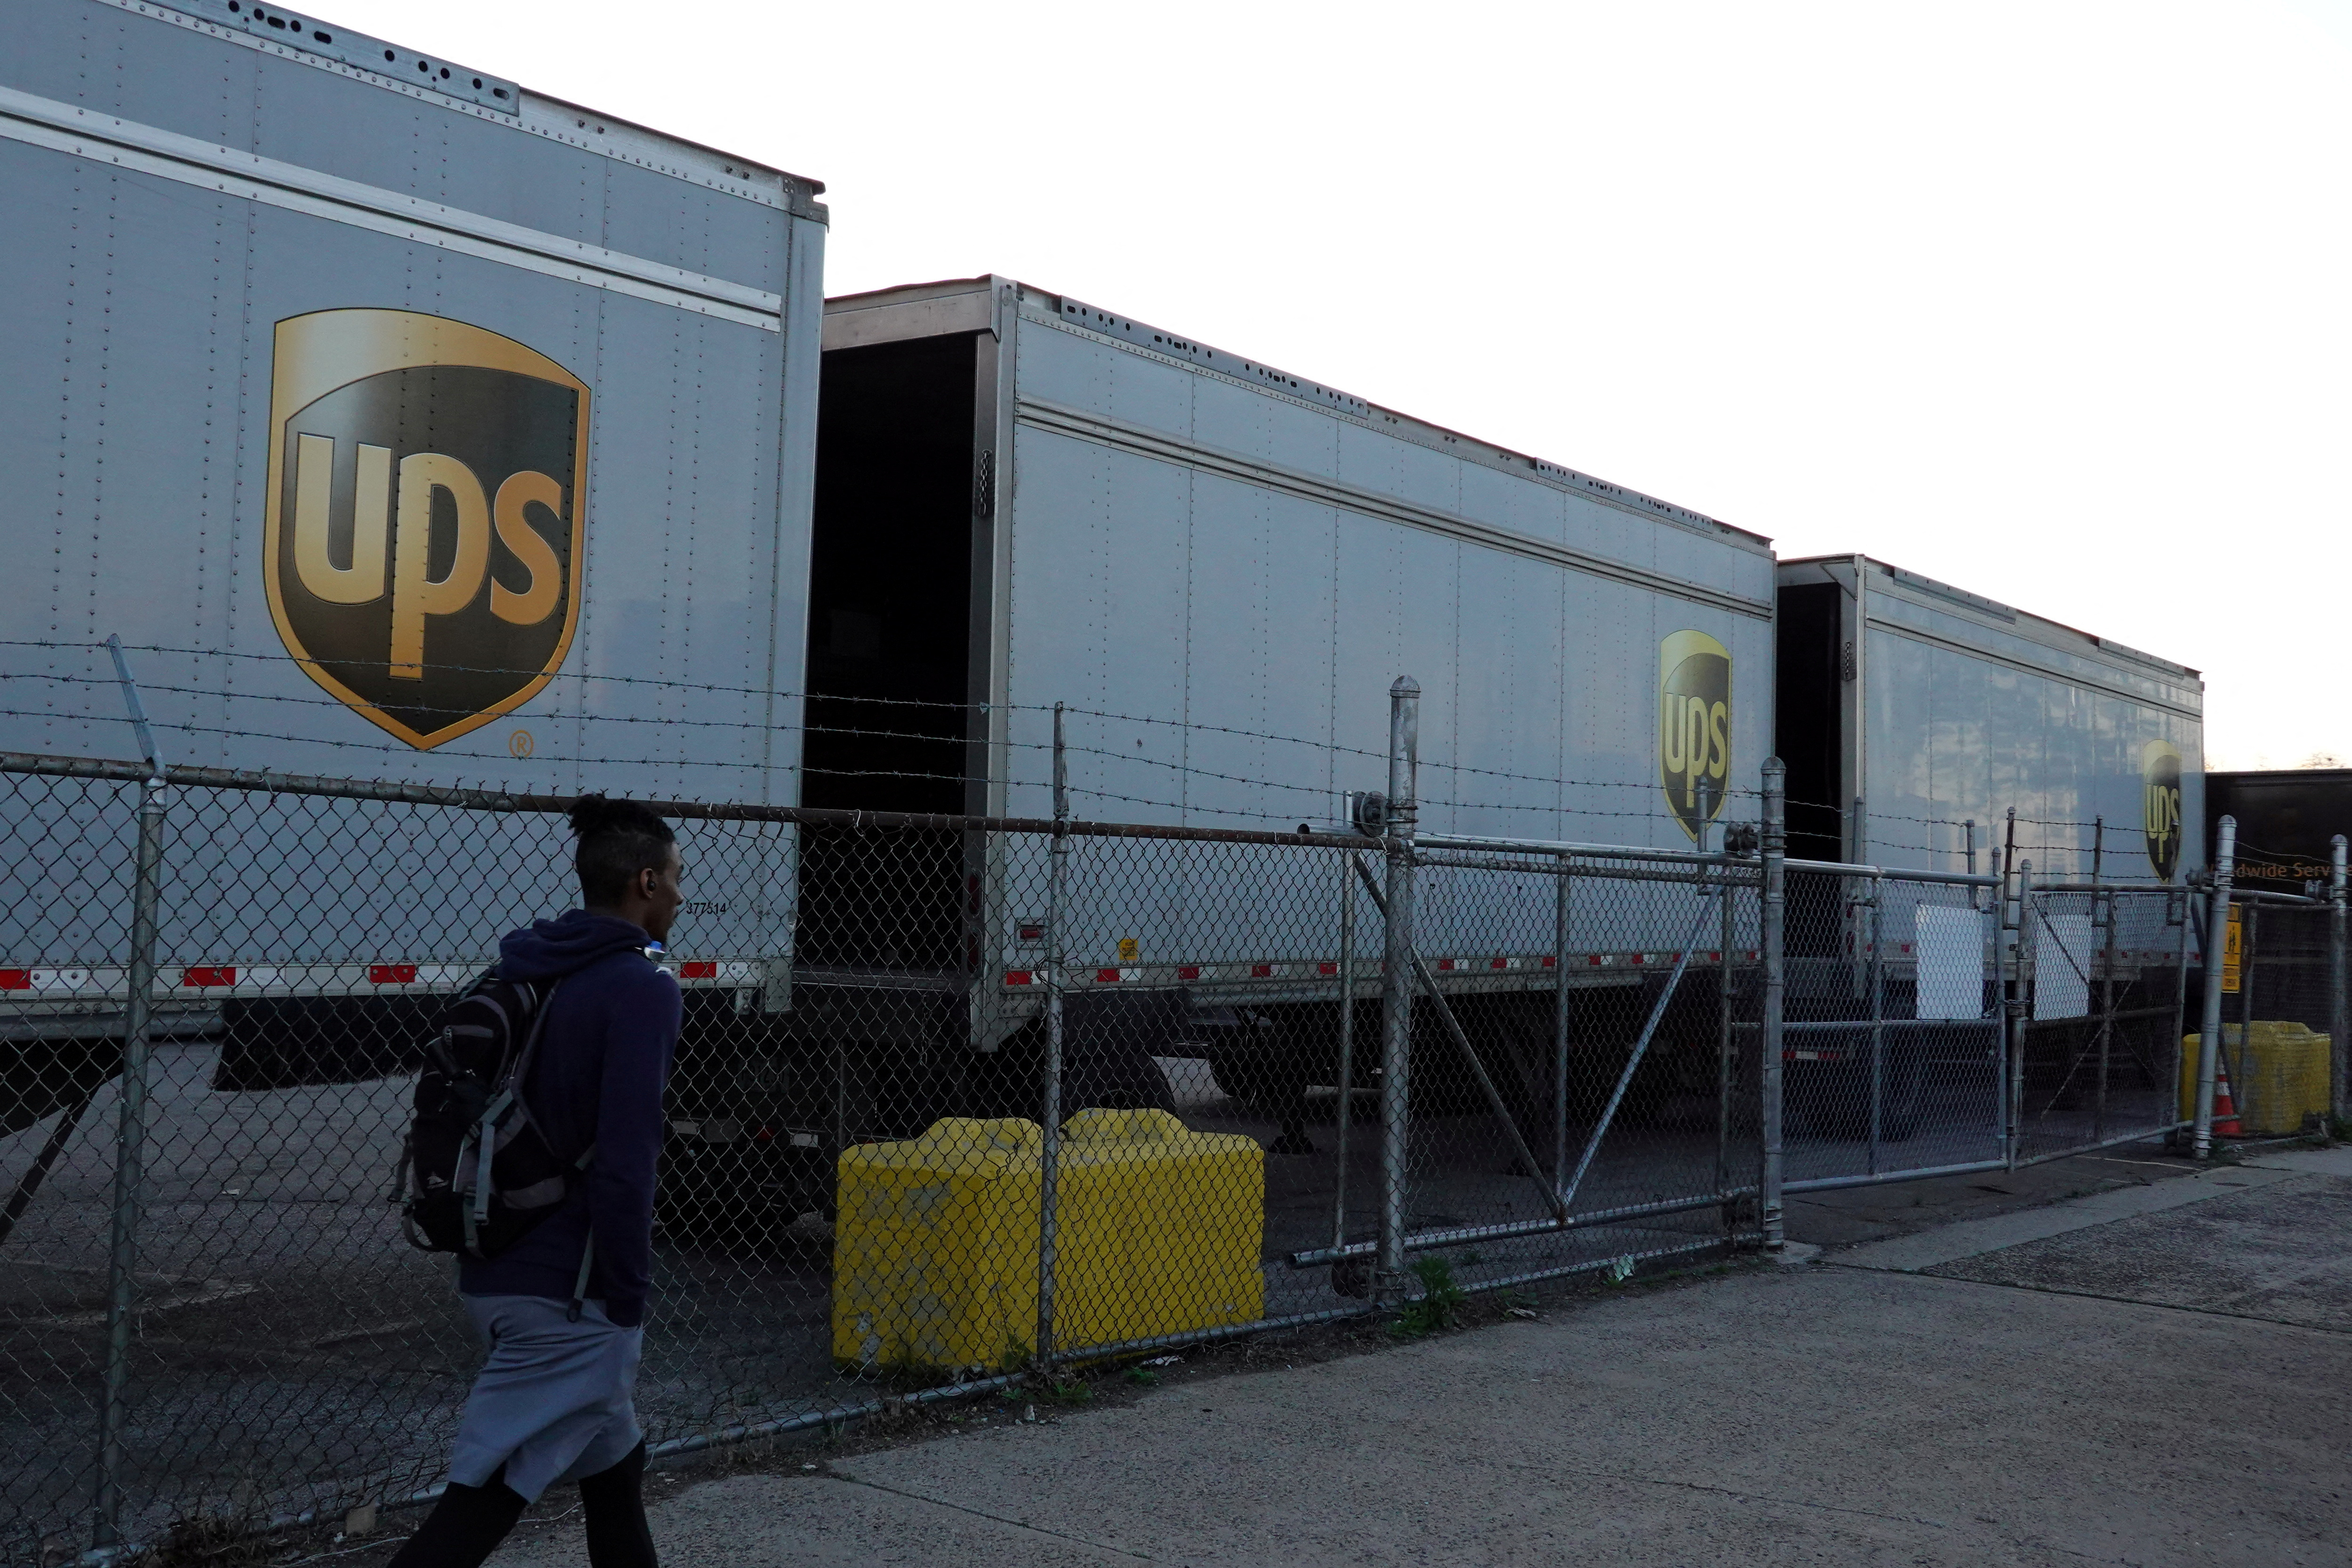 A person walks by United Parcel Service (UPS) trailers at a facility in Brooklyn, New York City